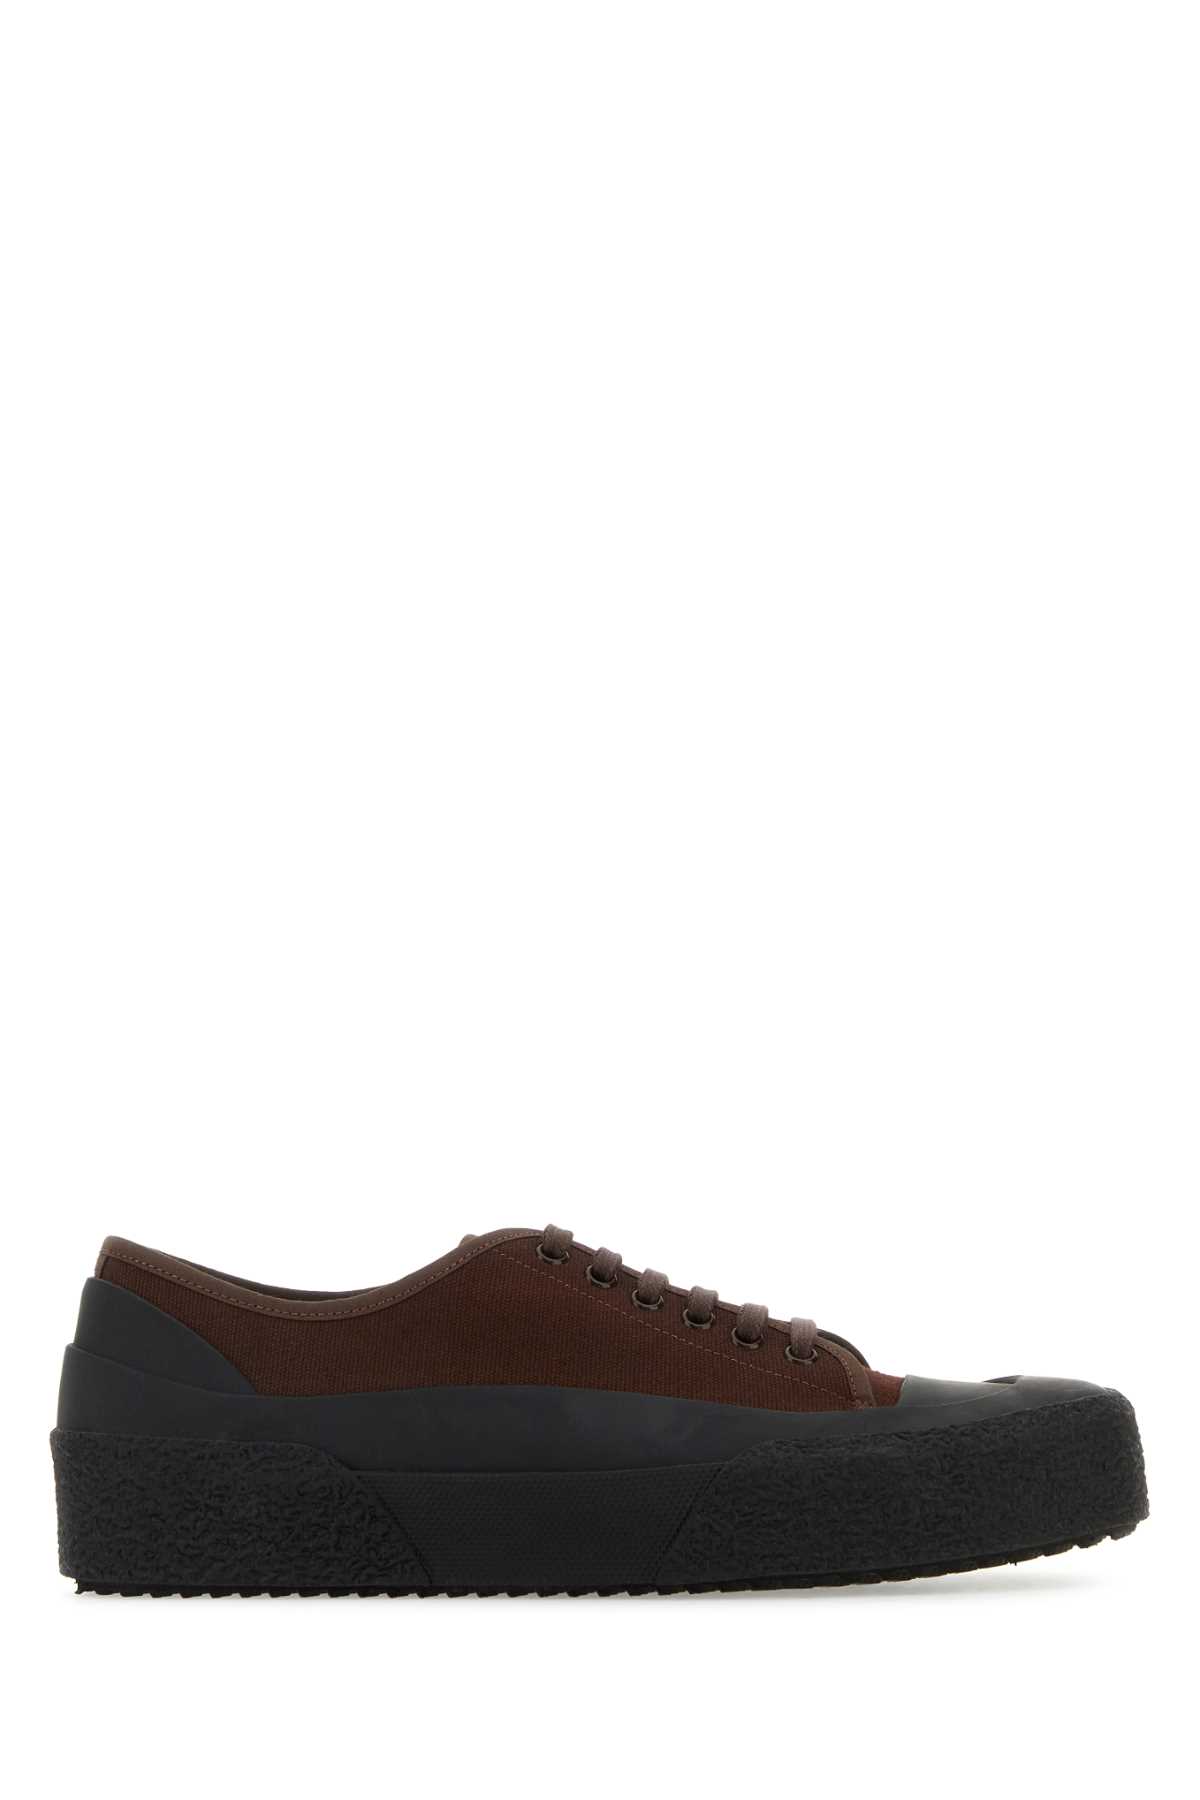 Chocolate Canvas Sharp Sn Sneakers